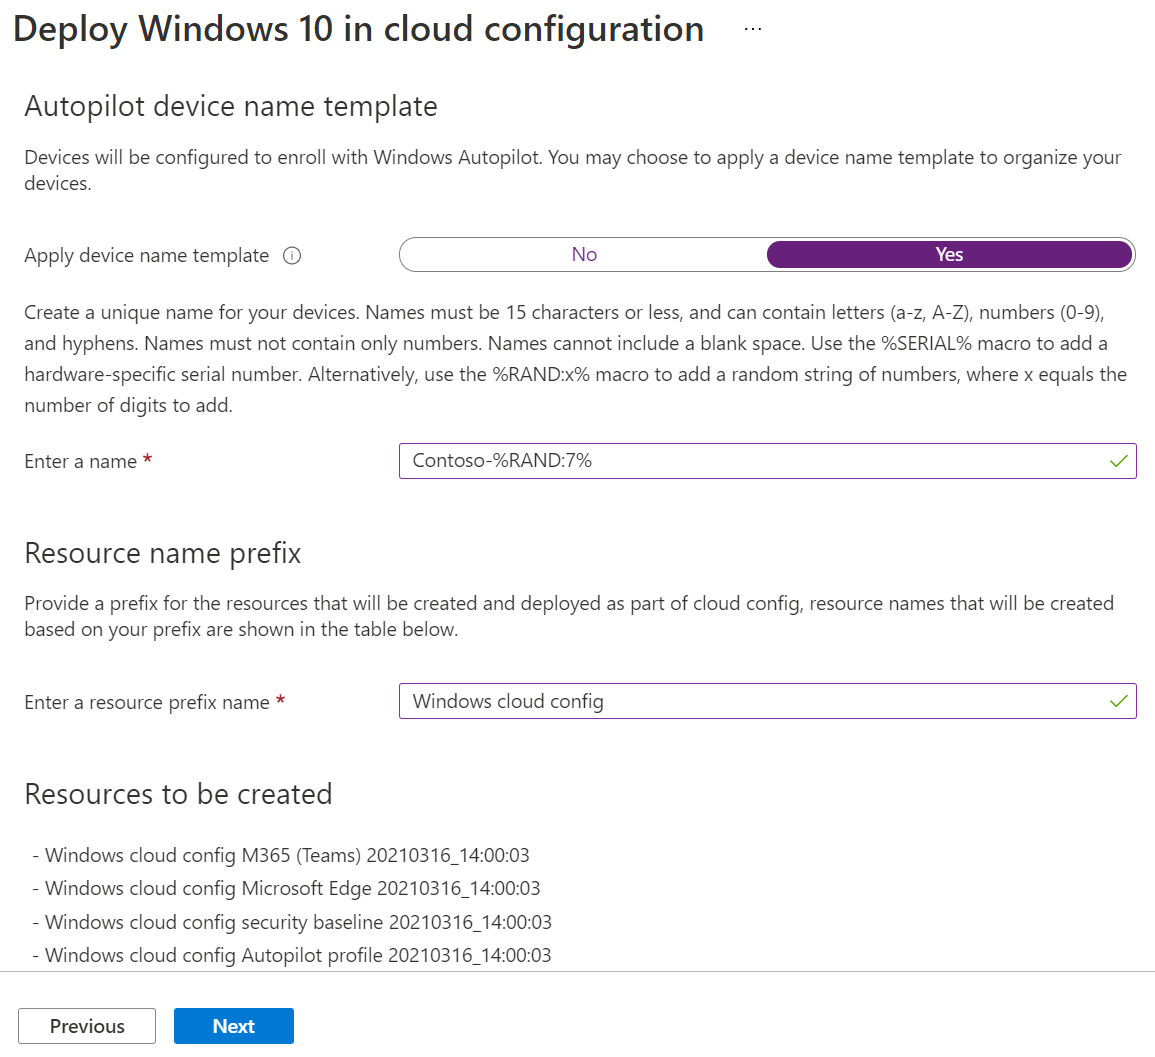 Screenshot that shows how to configure the device name template and resource name prefix in a Windows 10/11 cloud configuration guided scenario in Microsoft Intune.